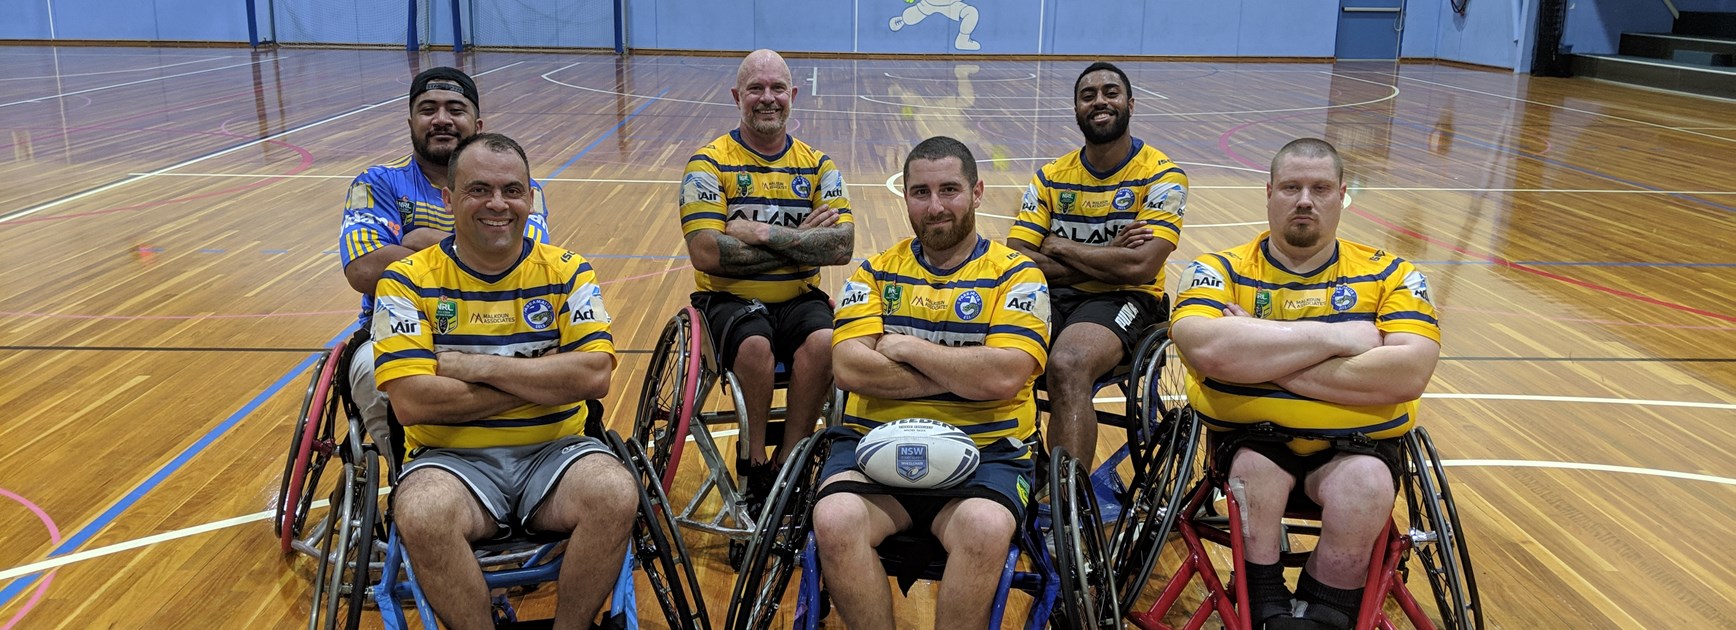 Eels Wheelchair Rugby League defeated in Semi Finals